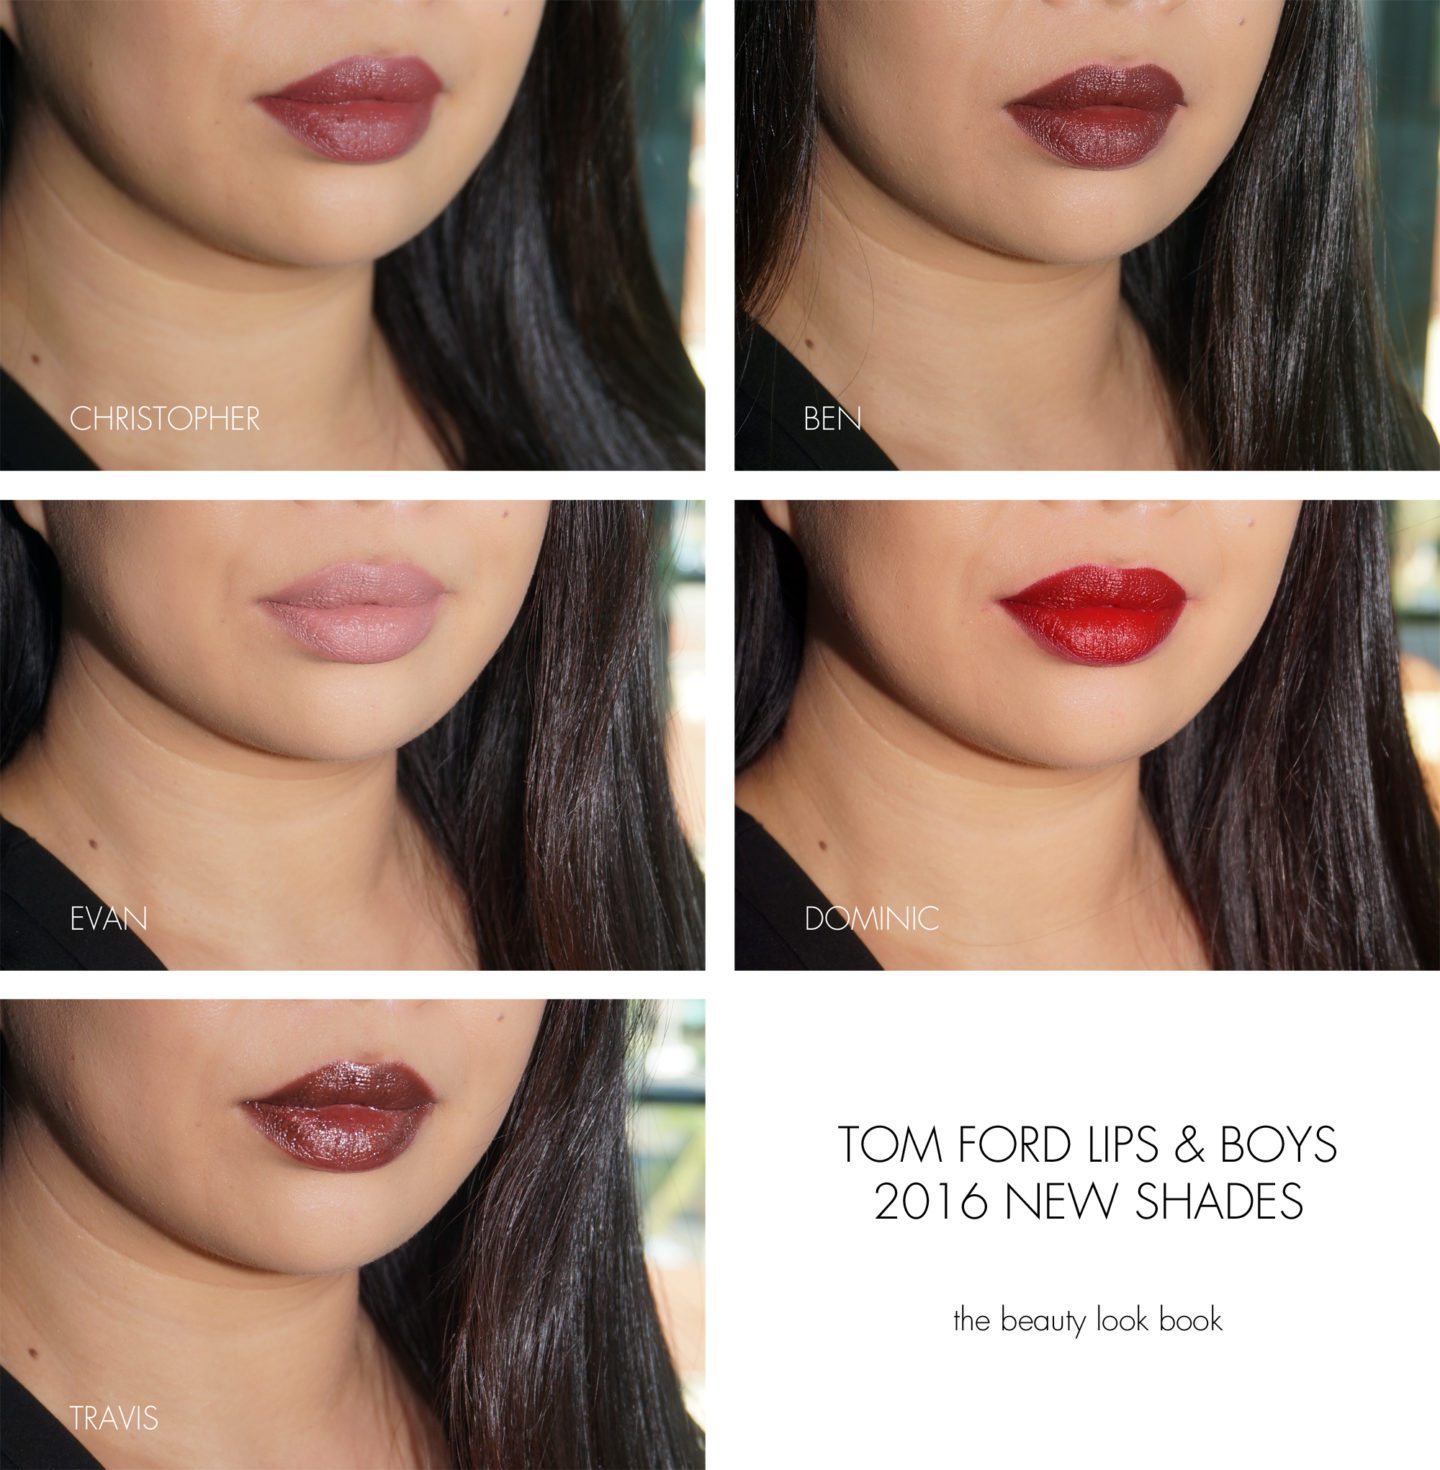 Tom Ford Lips and Boys 2016 Christopher, Ben, Evan, Dominic, Travis